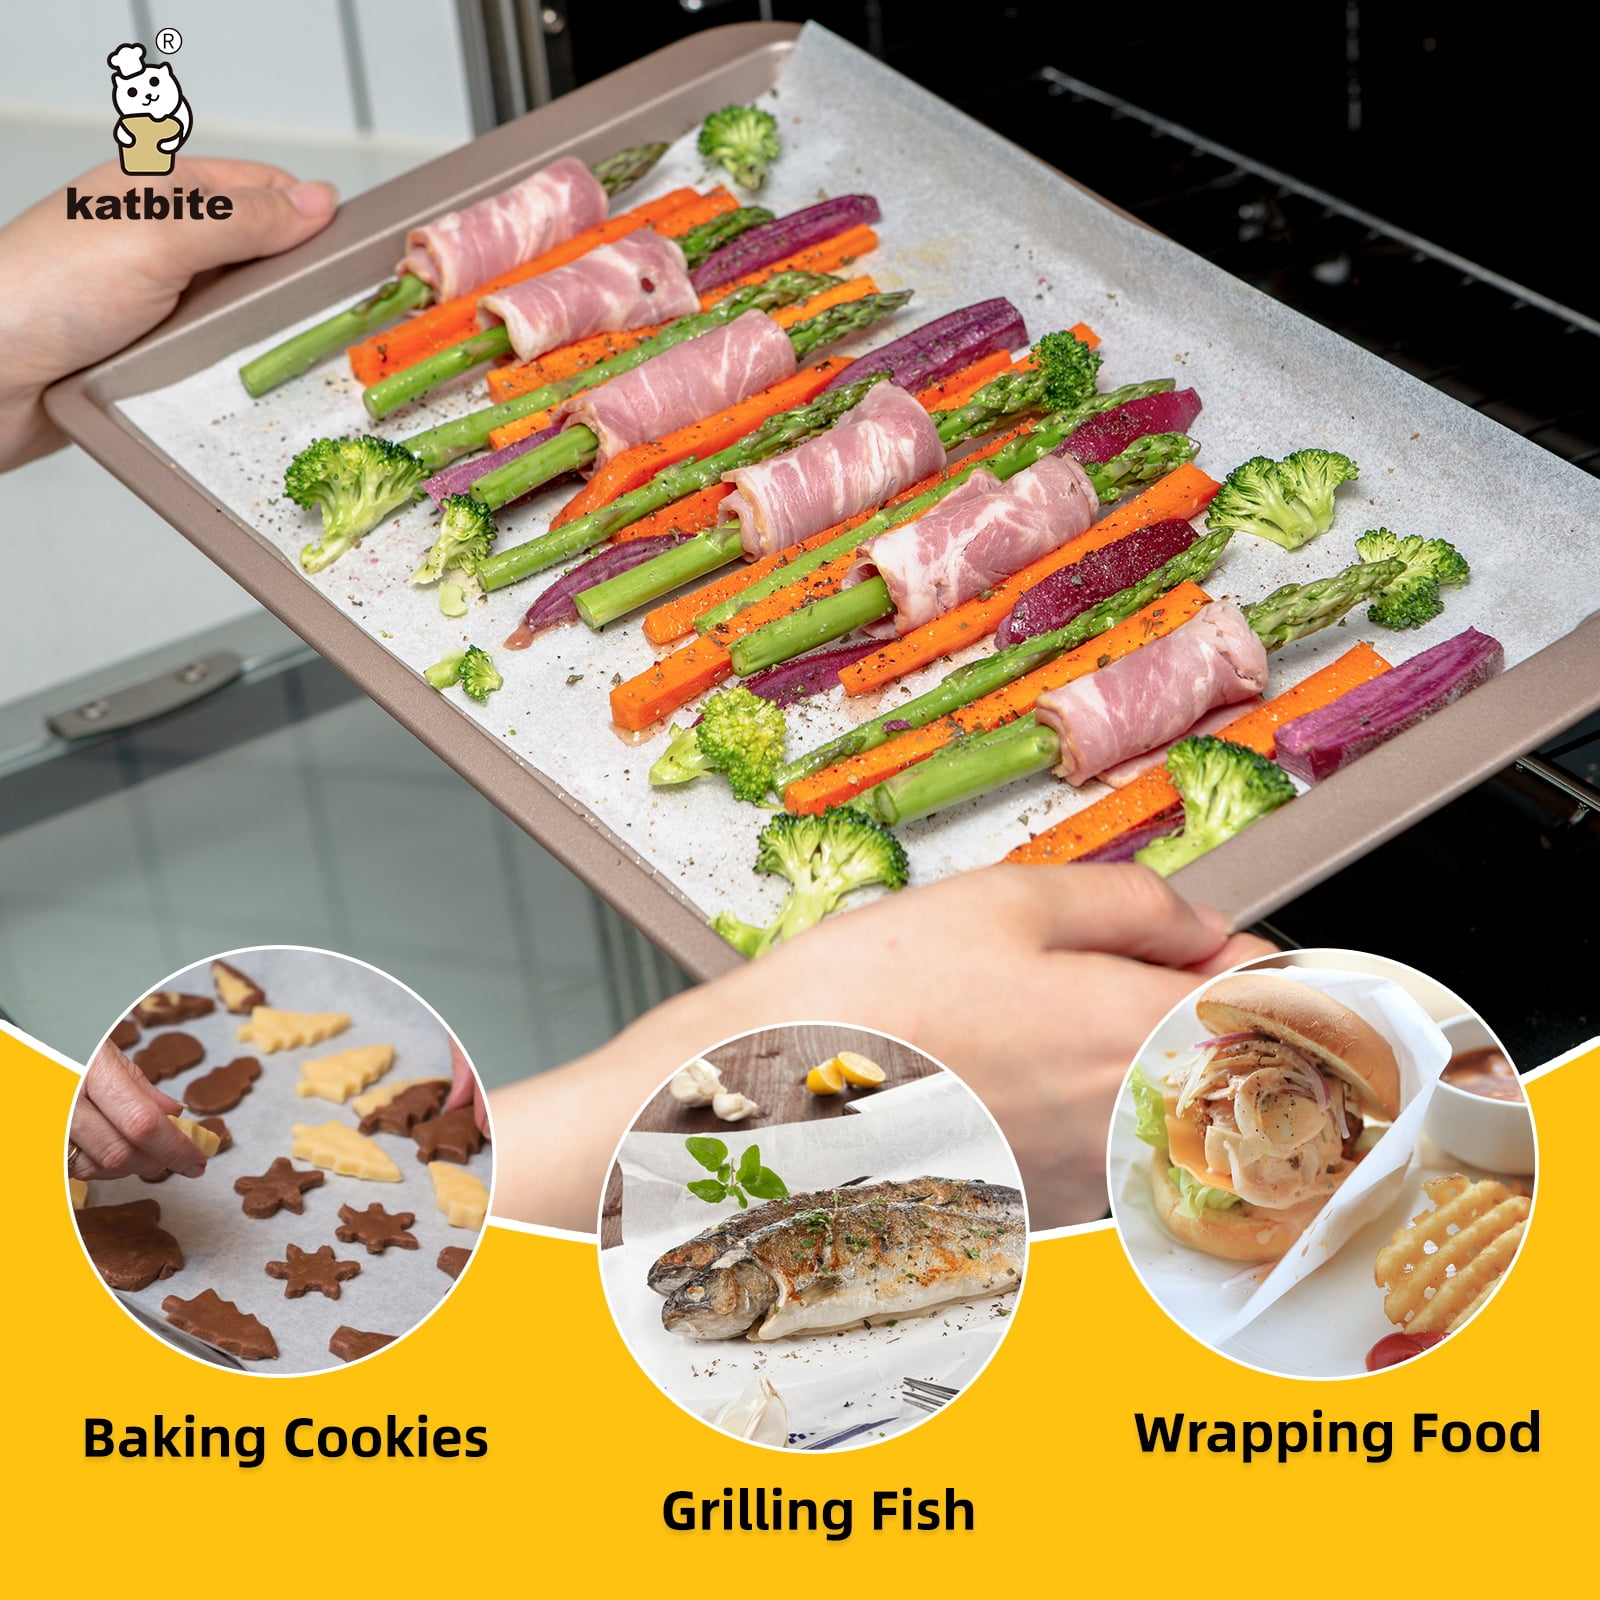 Katbite Heavy Duty Parchment Paper Roll & Slide Cutter for 15 Inches  Plastic Food Wrap